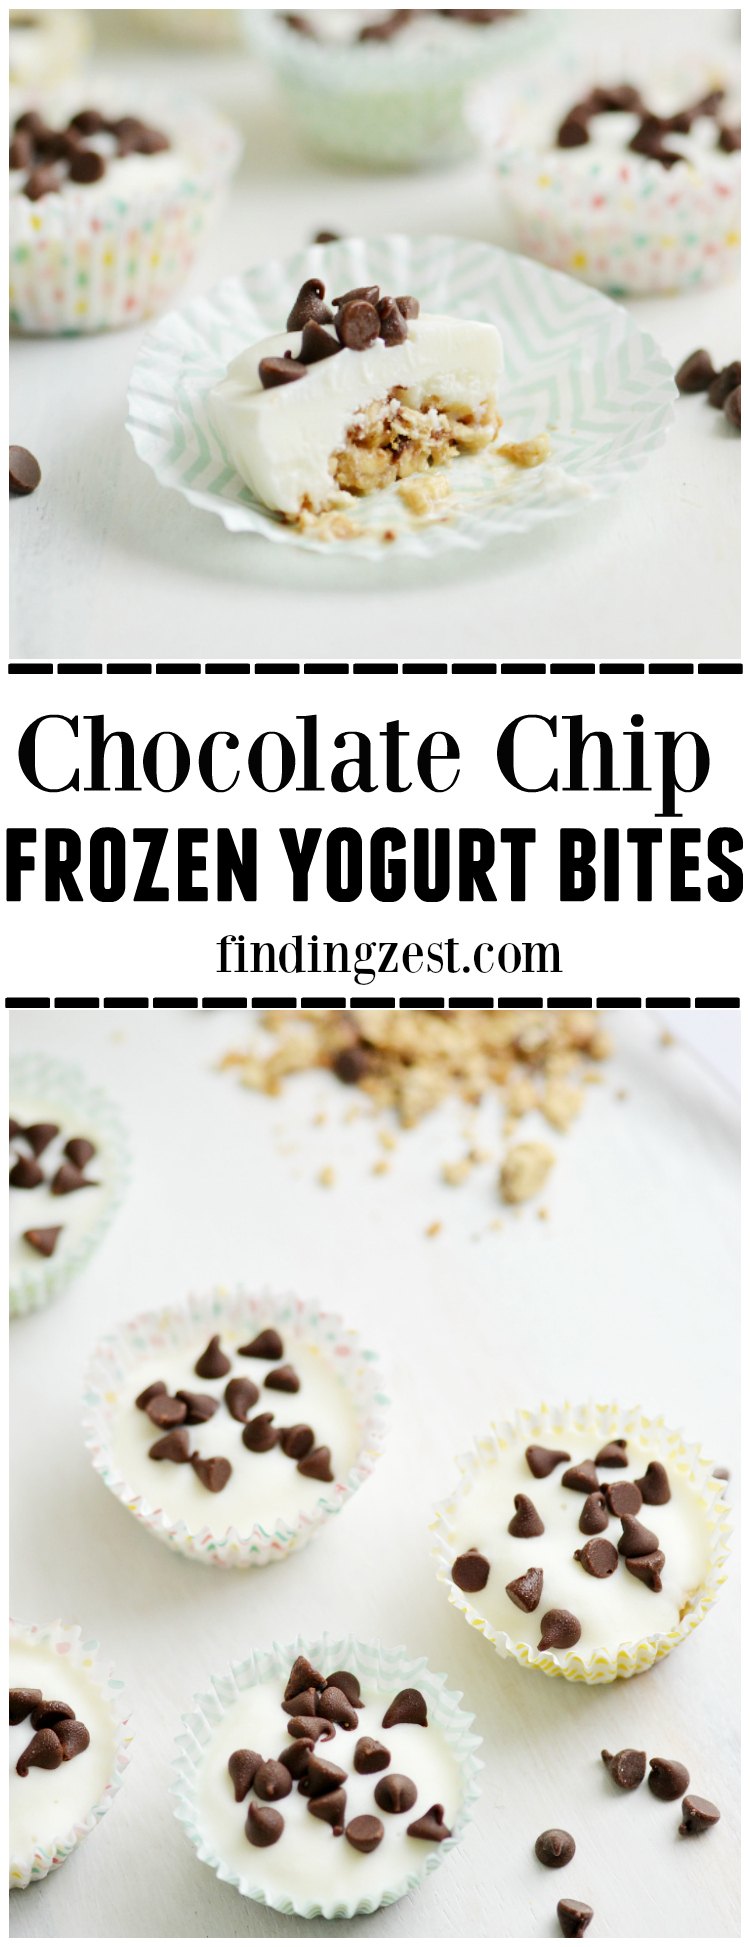 Only three ingredients are needed to make these Chocolate Chip Frozen Yogurt Bites! Kids will love this fun and easy snack.